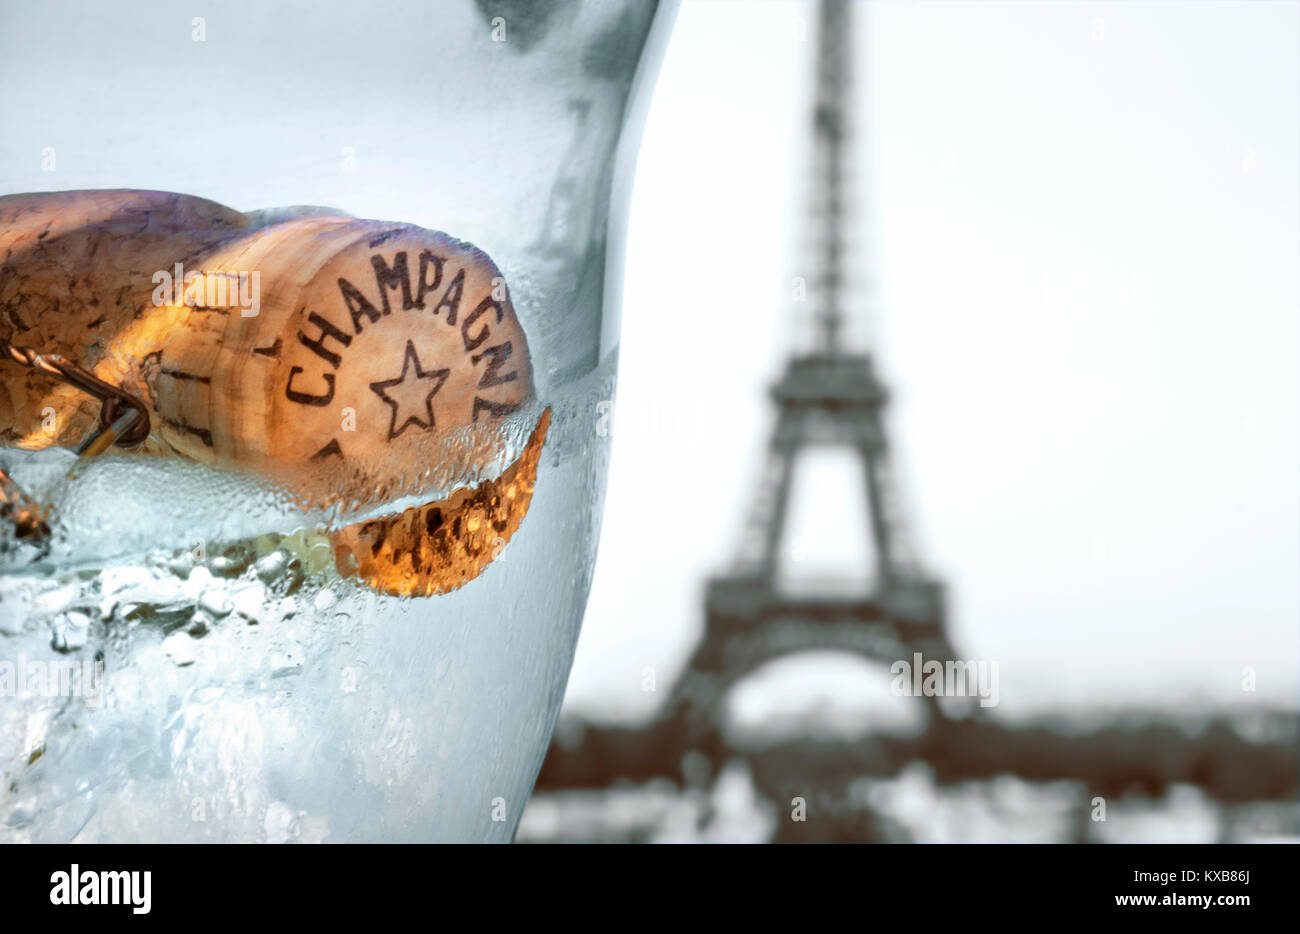 PARIS RETRO CHAMPAGNE EIFFEL TOWER French champagne cork floating in ice wine cooler with Eiffel Tower in background Paris France Stock Photo